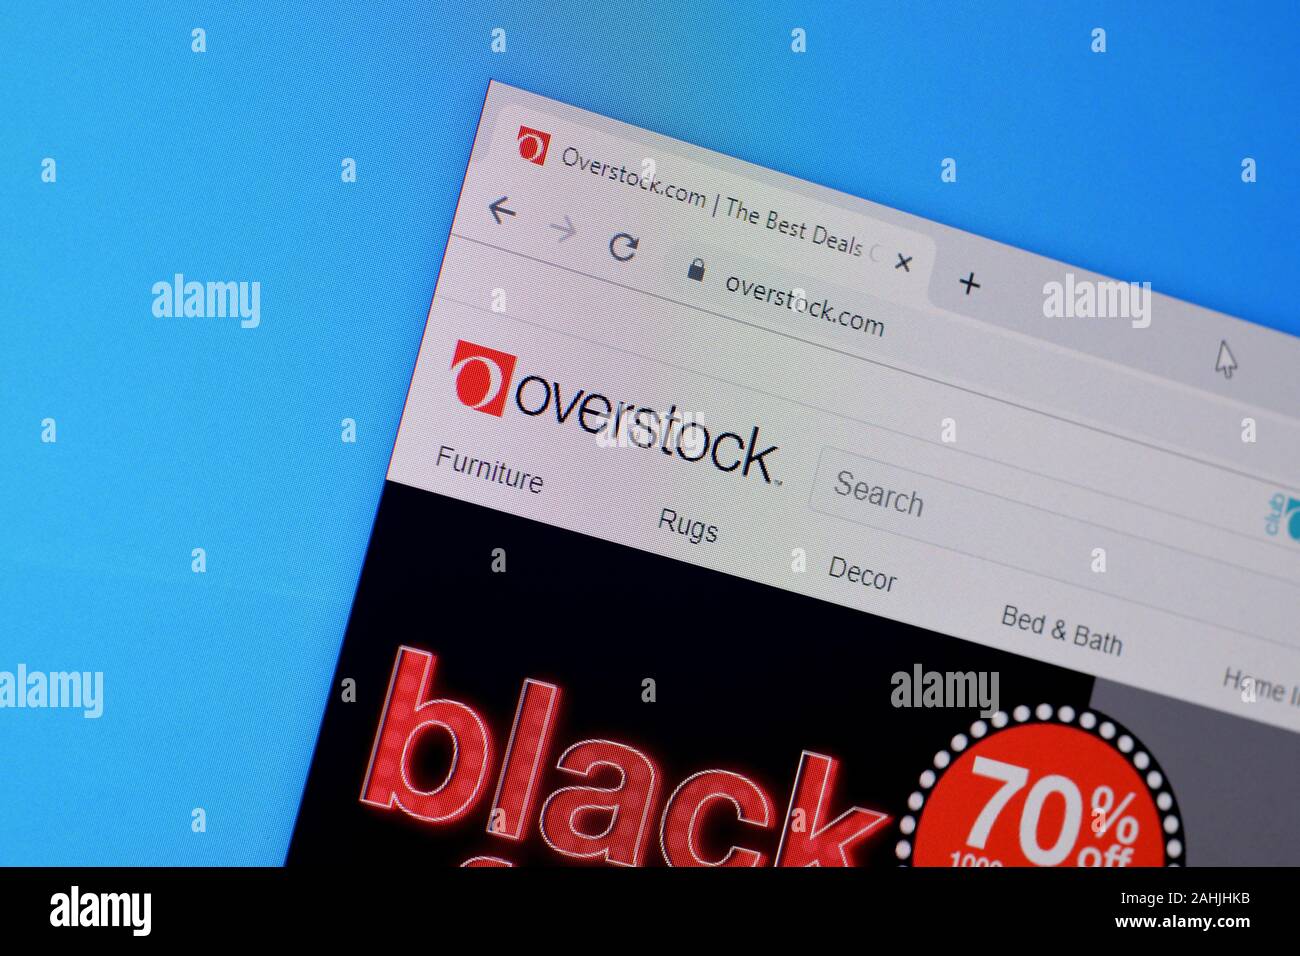 NY, USA - DECEMBER 16, 2019: Homepage of overstock website on the display of PC, url - overstock.com. Stock Photo